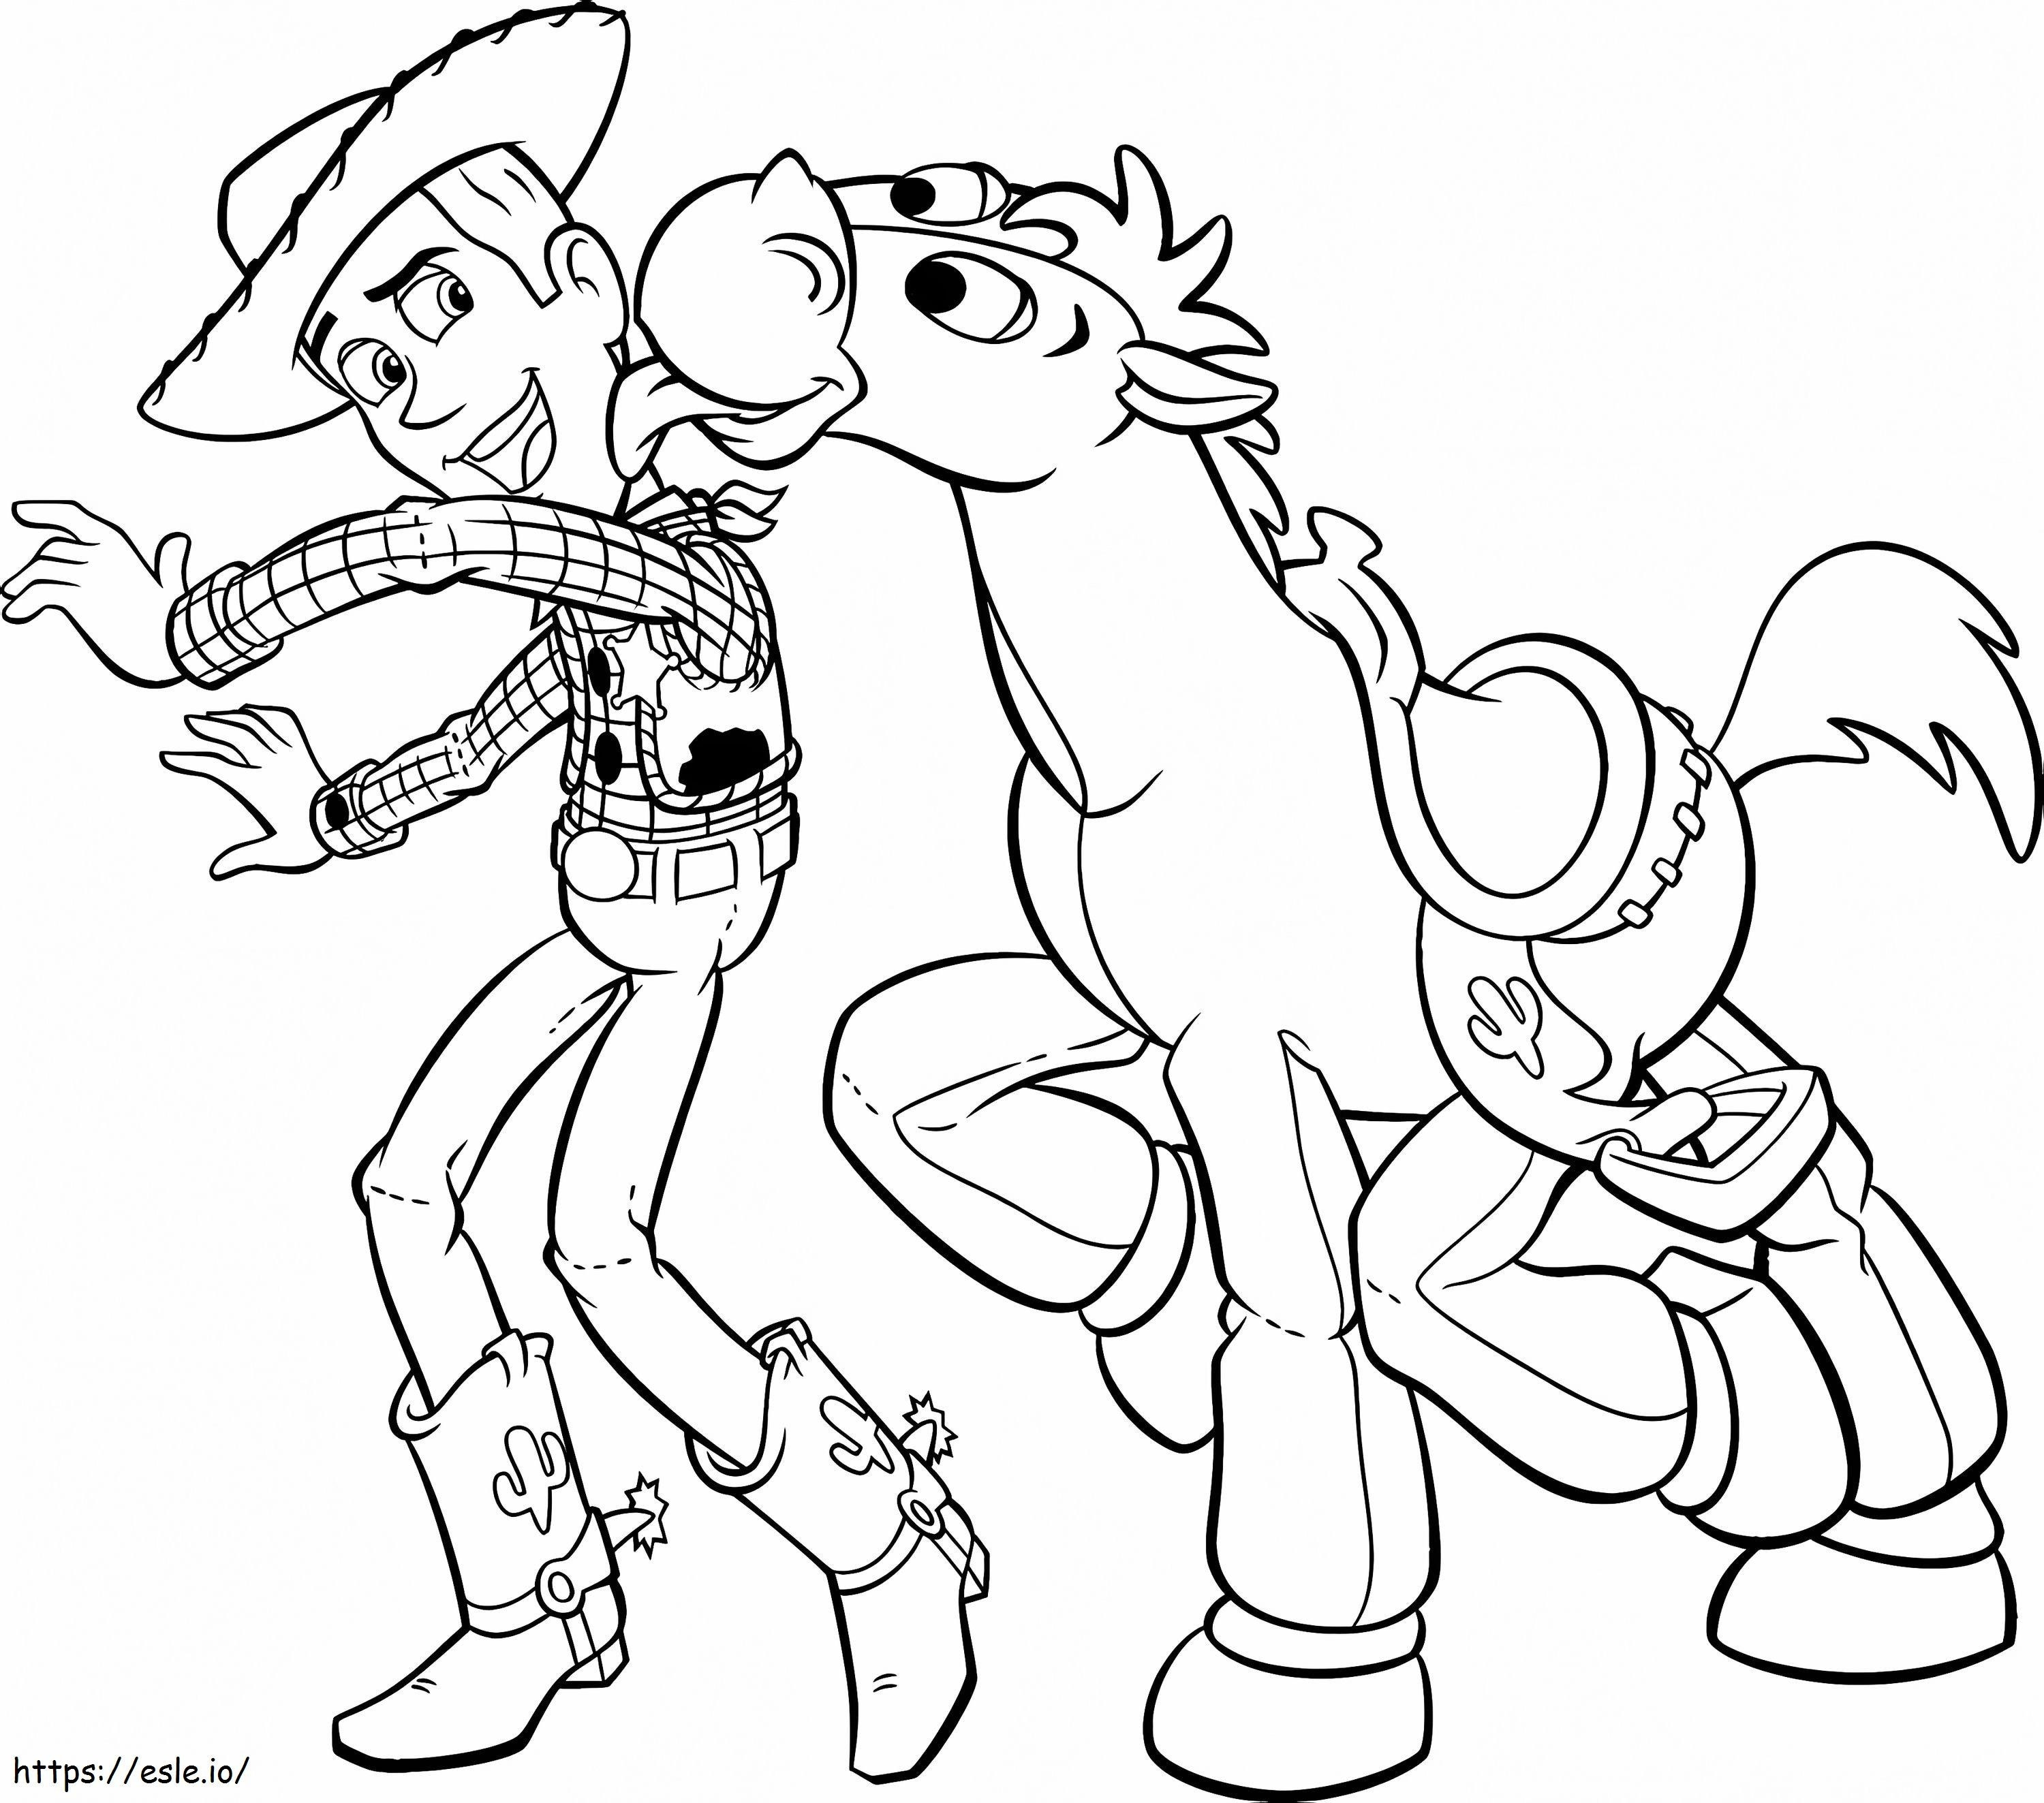 1559876860 Woody And Bullseye A4 coloring page